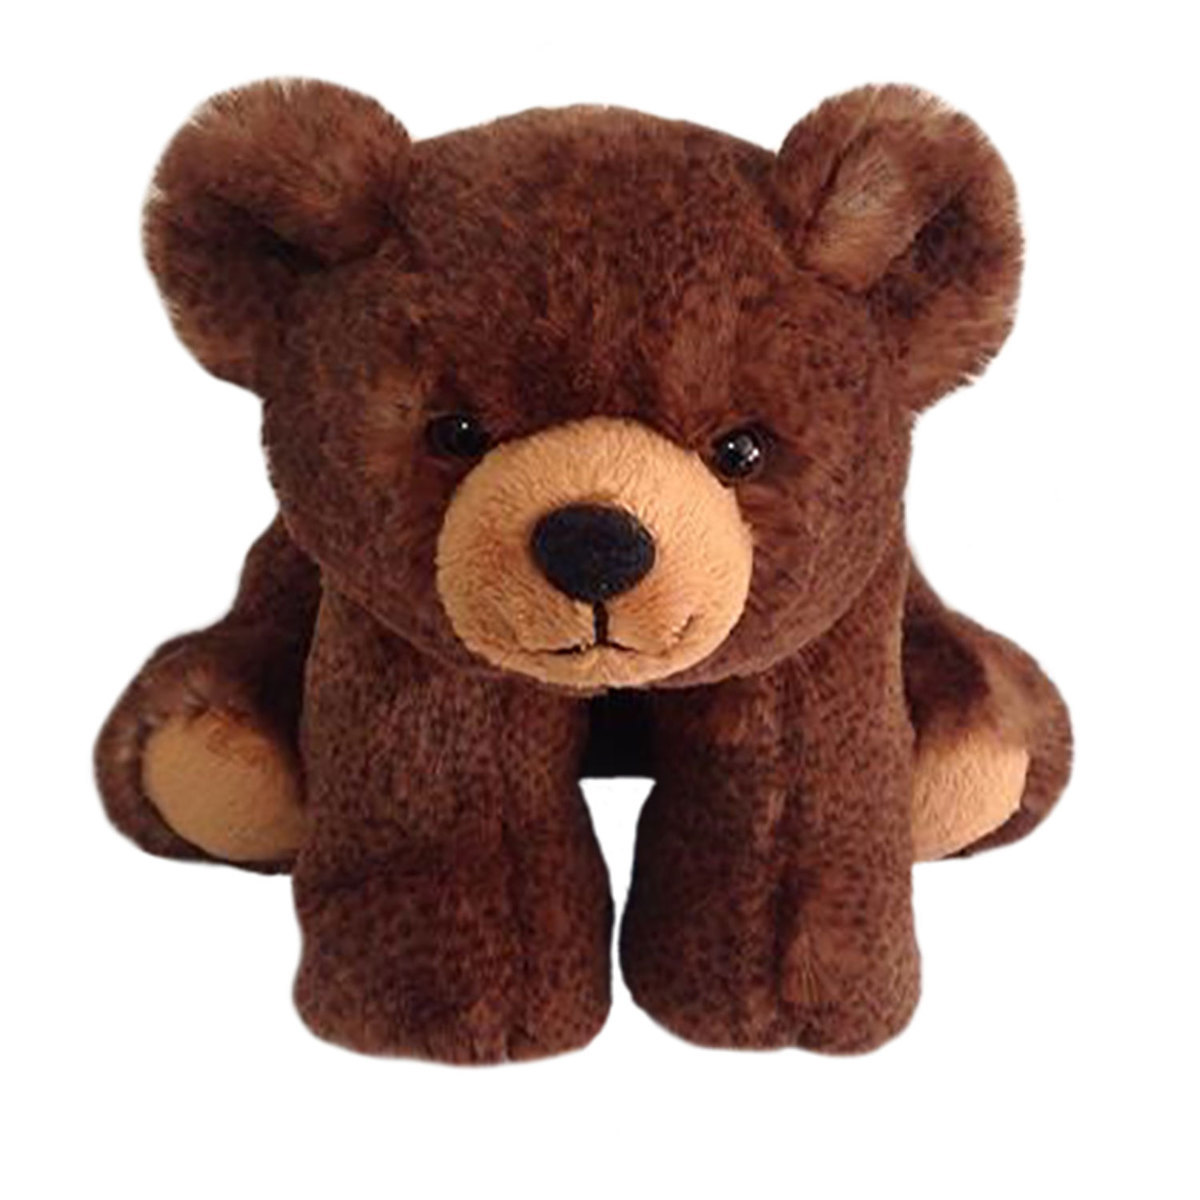 Wishpets 10 inch Grizzly Bear - Grizzly Bear 10in | Sportsman's Warehouse